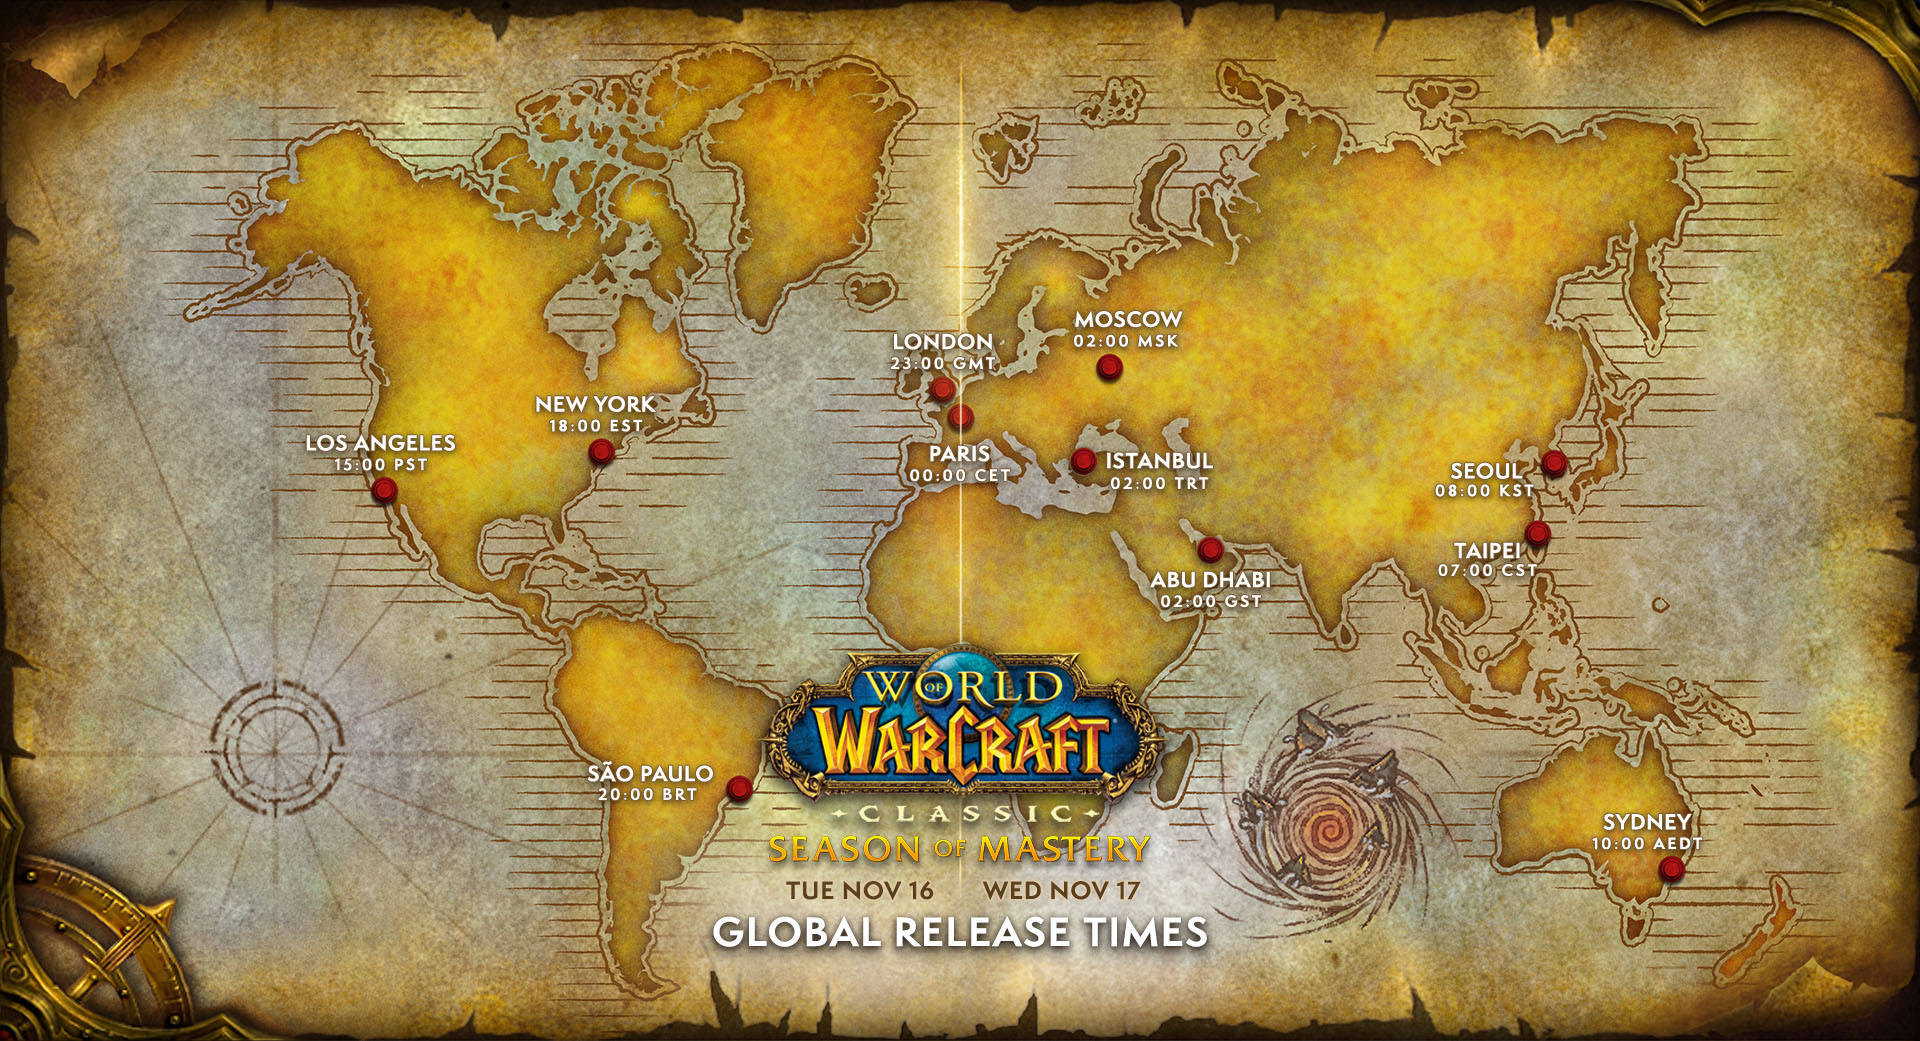 Name Reservation for EU Realms Open for Season of - Wowhead News